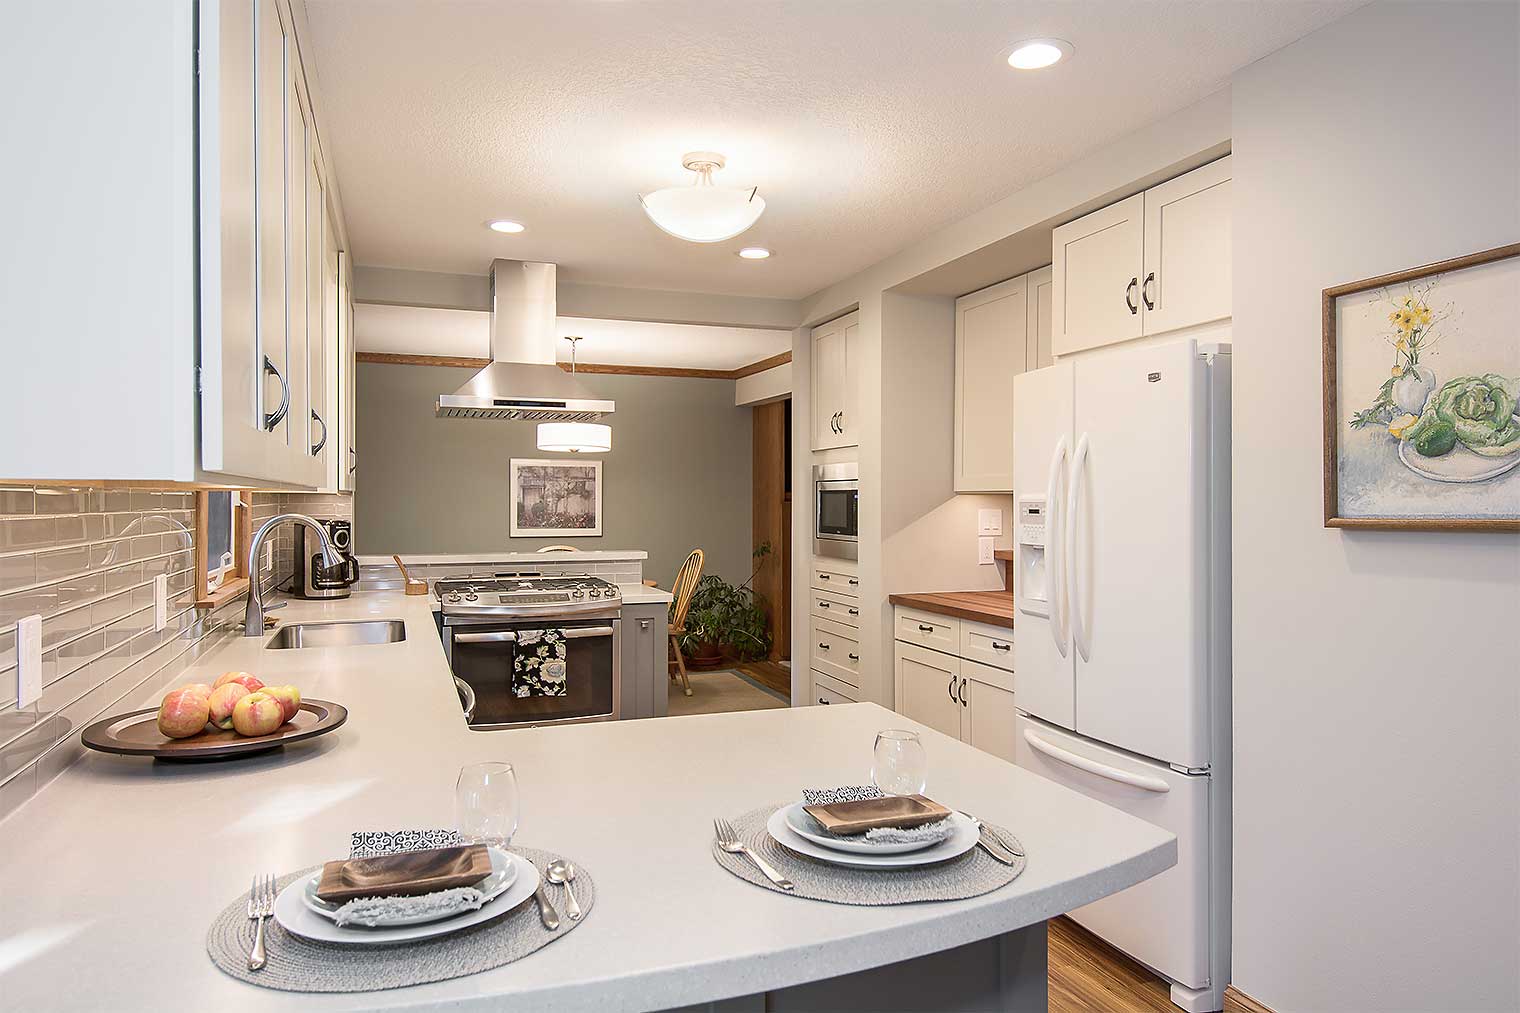 Casual counter dining area in new Des Moines kitchen by remodeler Silent Rivers features white cabinets and counters